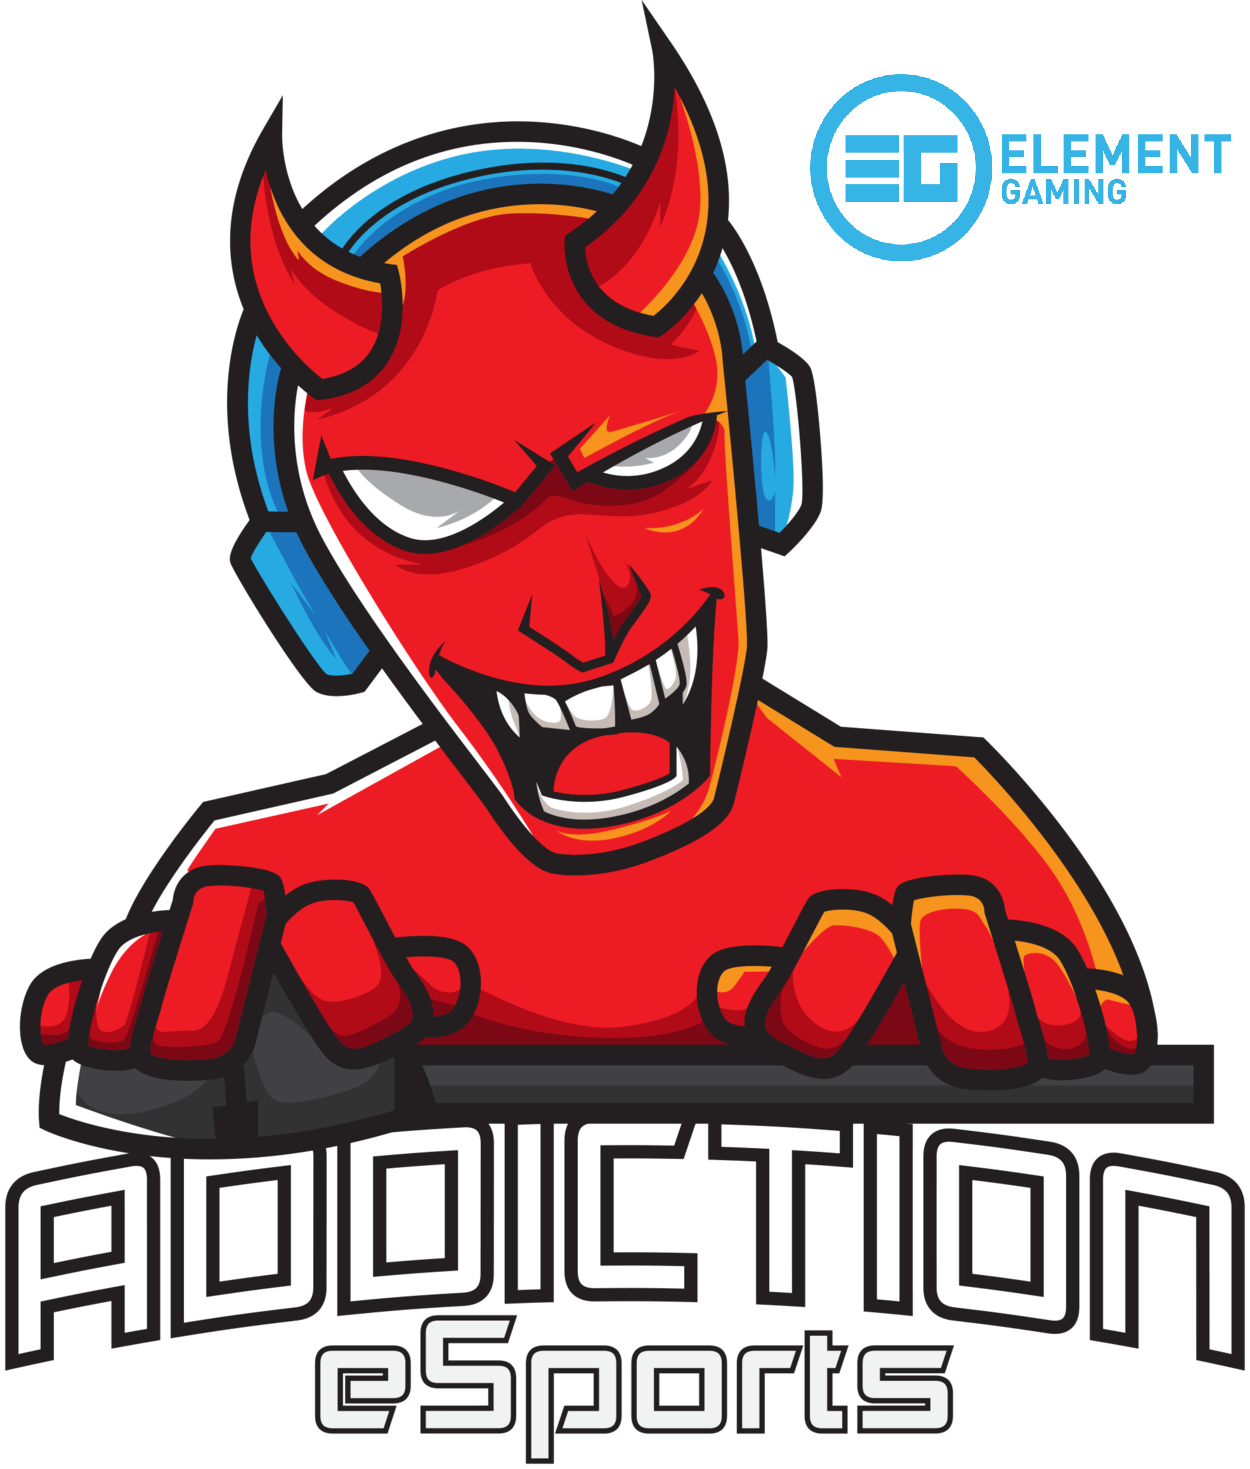 Element Gaming Logo - Element are addicted to gaming